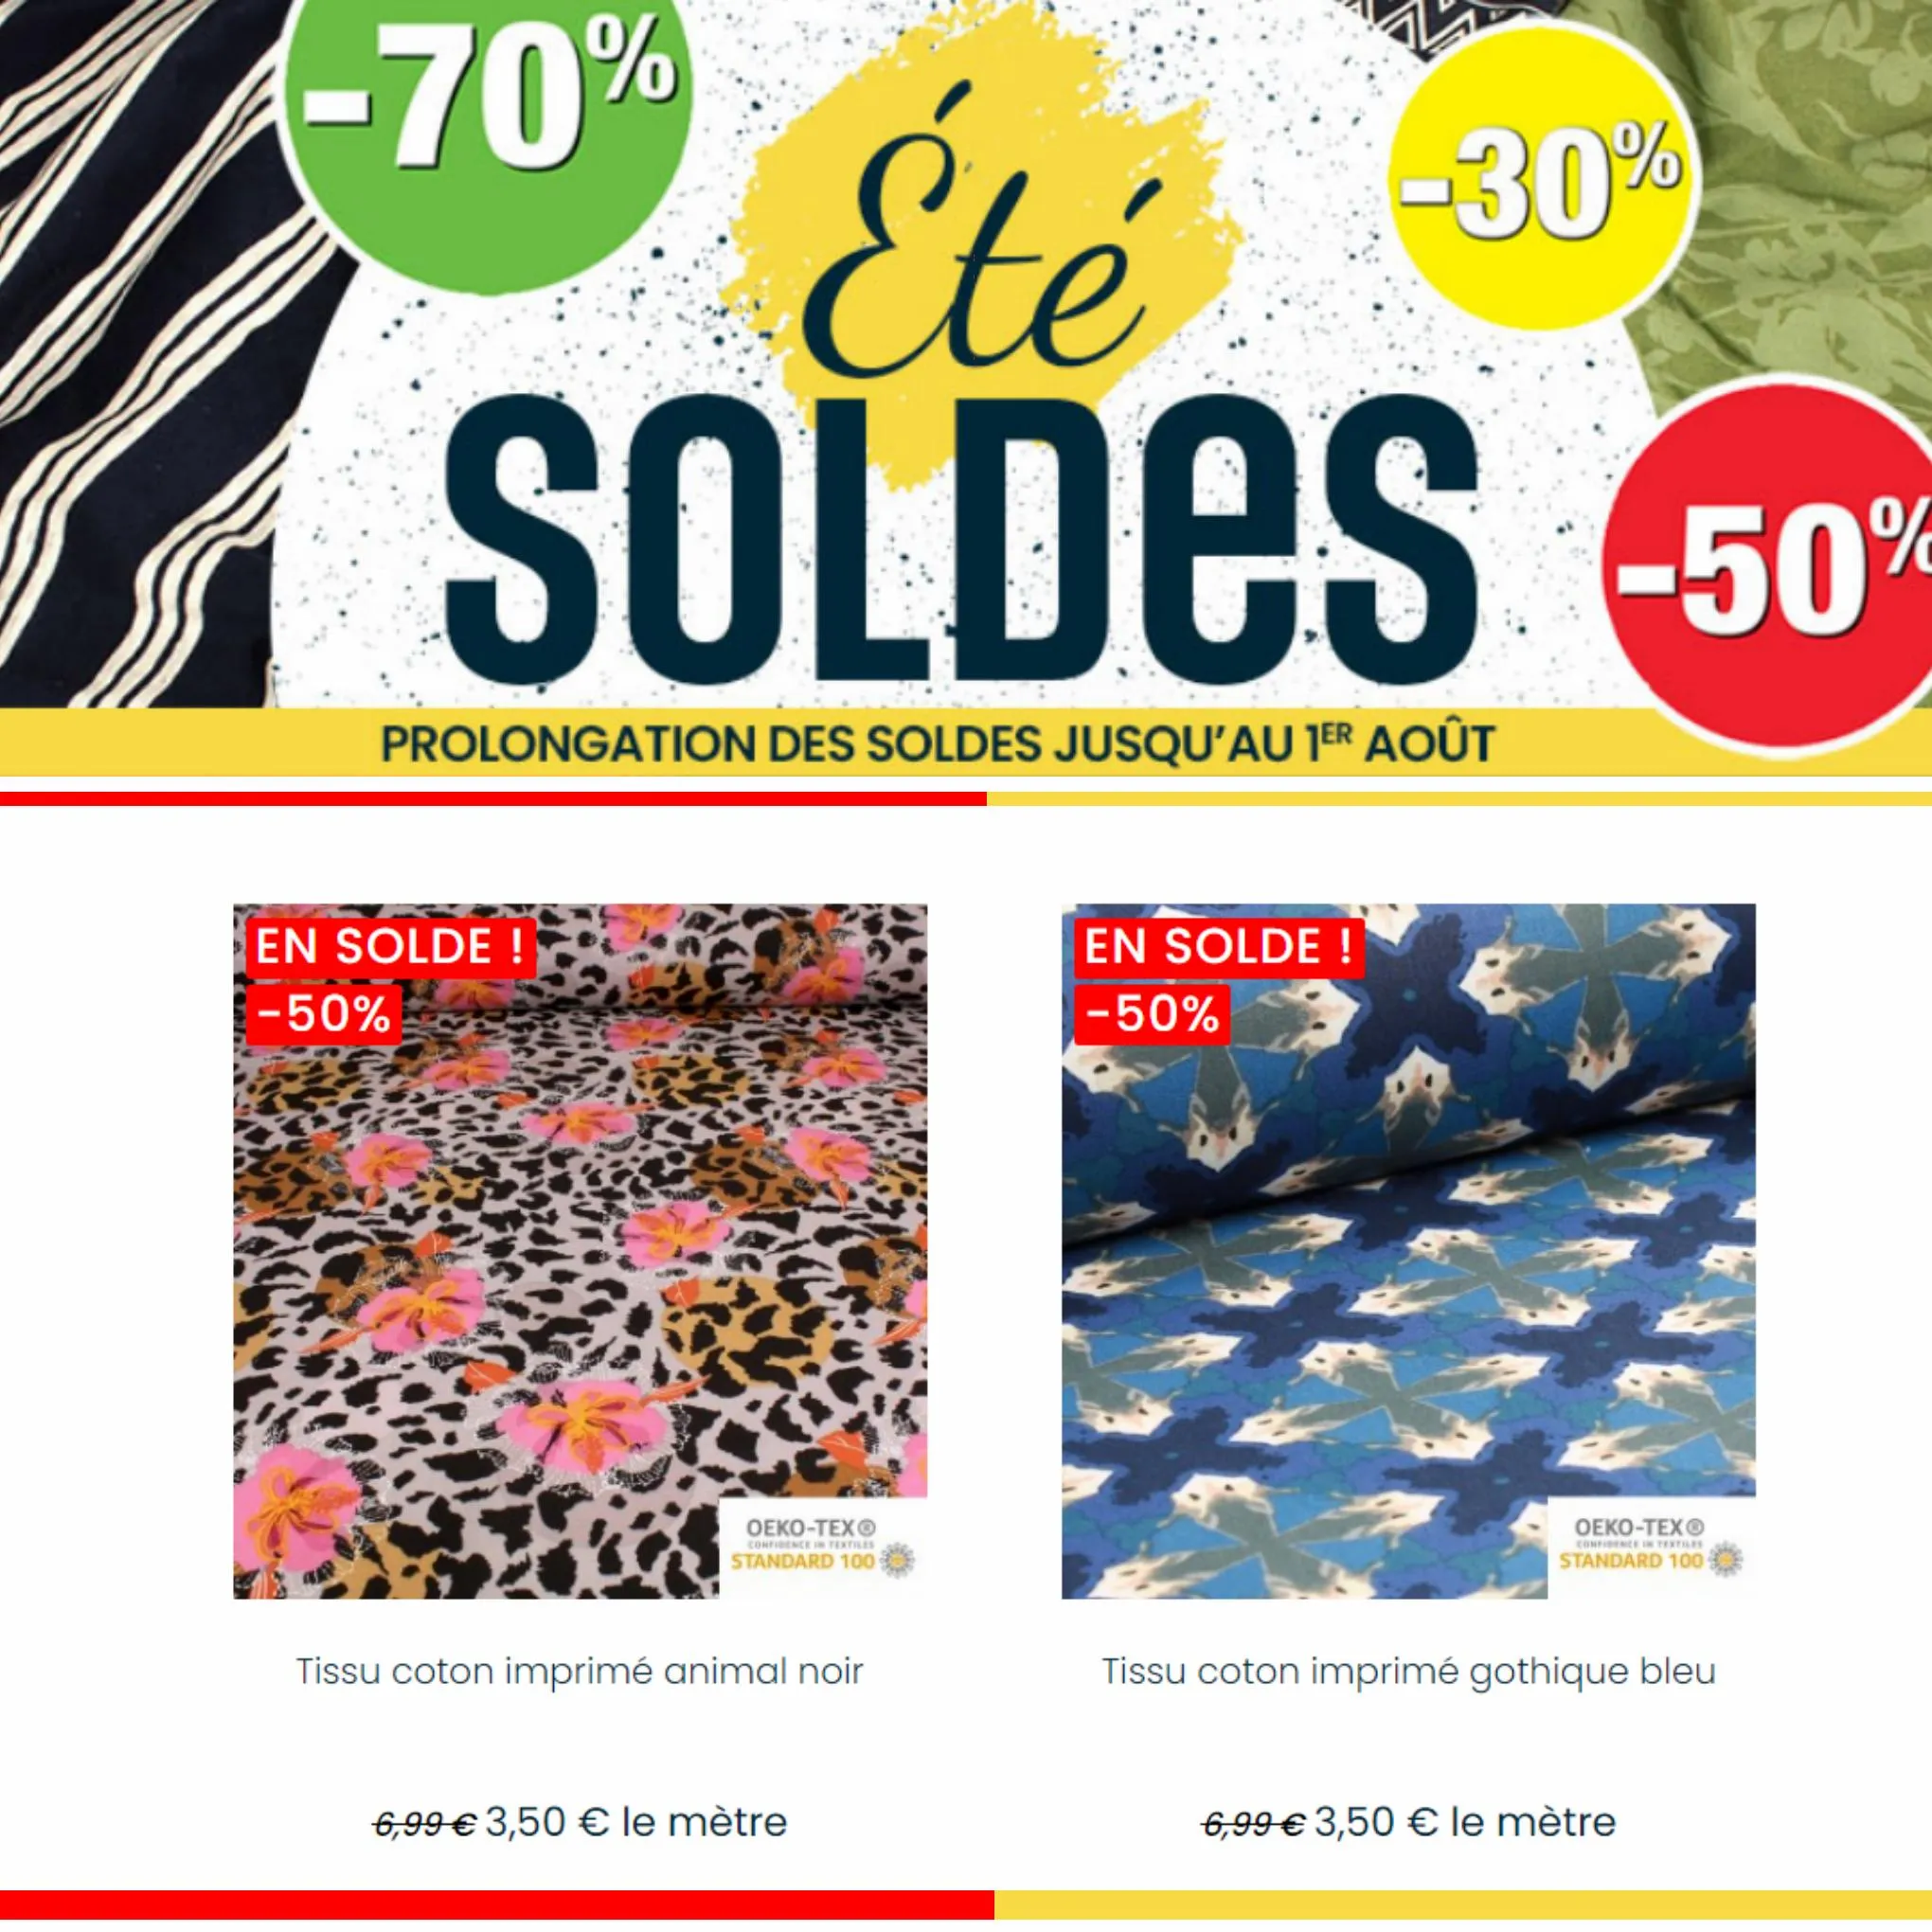 Catalogue Toto Soldes, page 00010